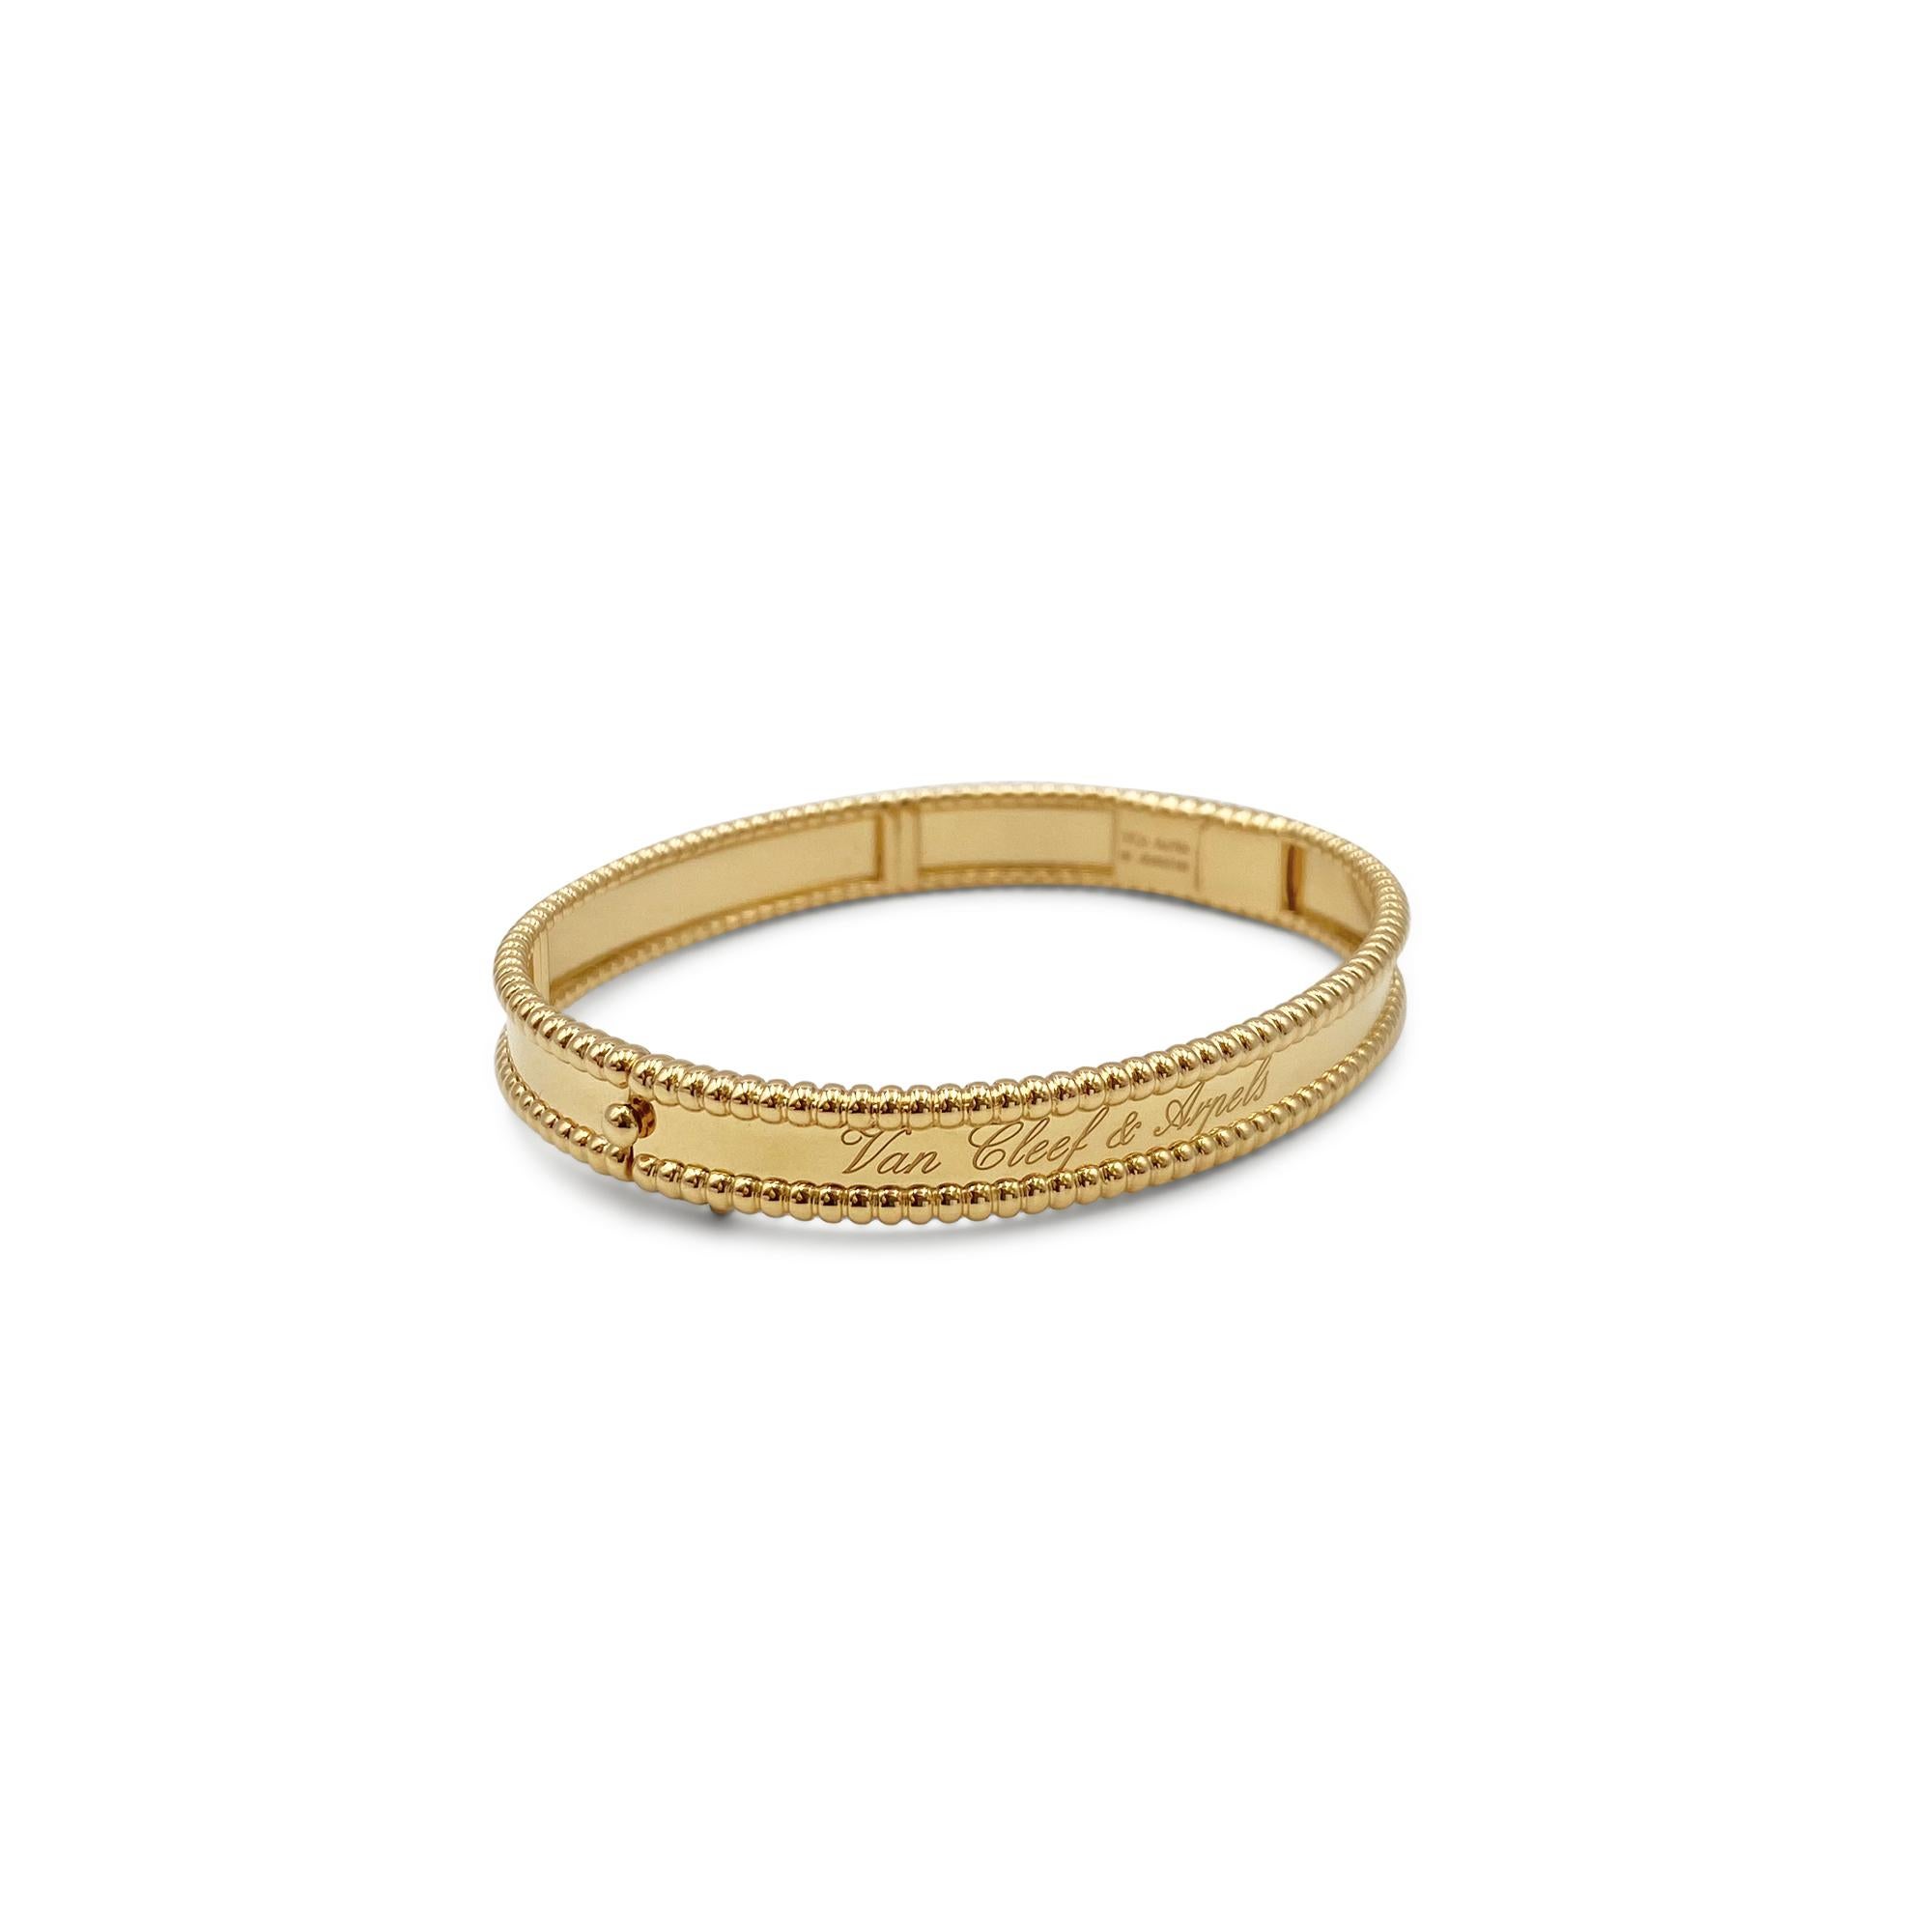 Authentic Van Cleef & Arpels Perlée Signature bracelet crafted in 18 karat yellow gold.  The high polished gold bangle features Van Cleef & Arpels signature and distinctive perlée border.  Size M, 6.3-inch internal circumference.  Signed VCA, Au750,